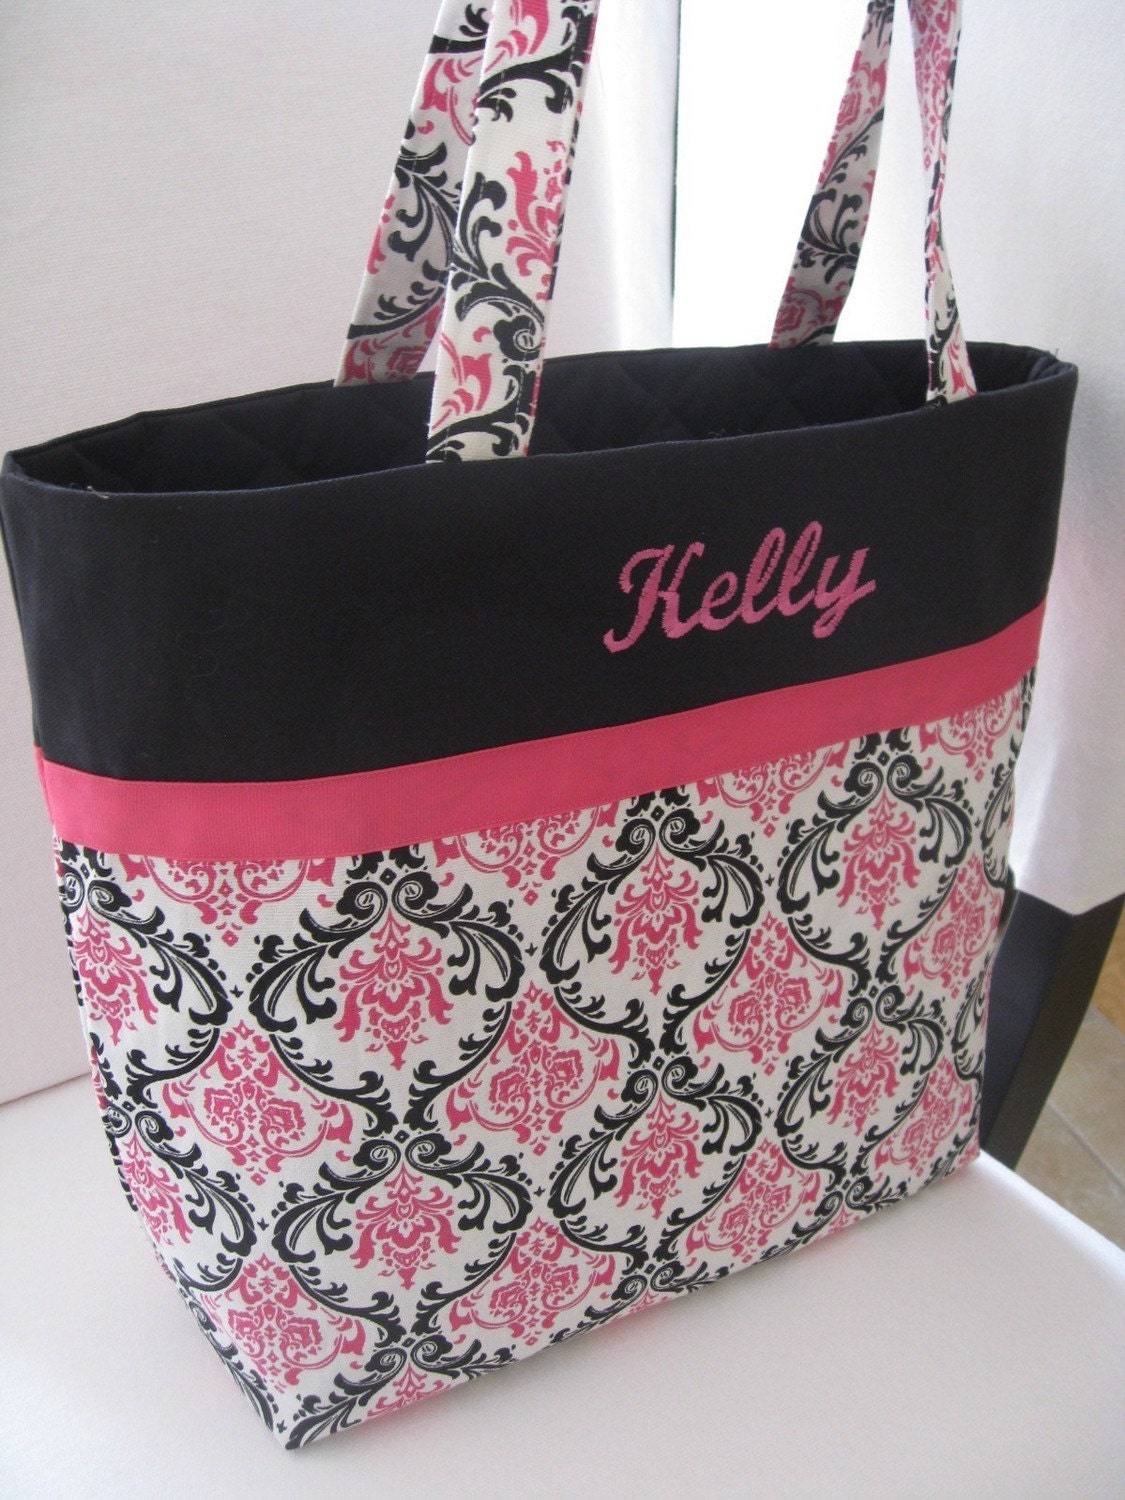 Personalized Embroidered Tote Bag - Pink and Black Damask